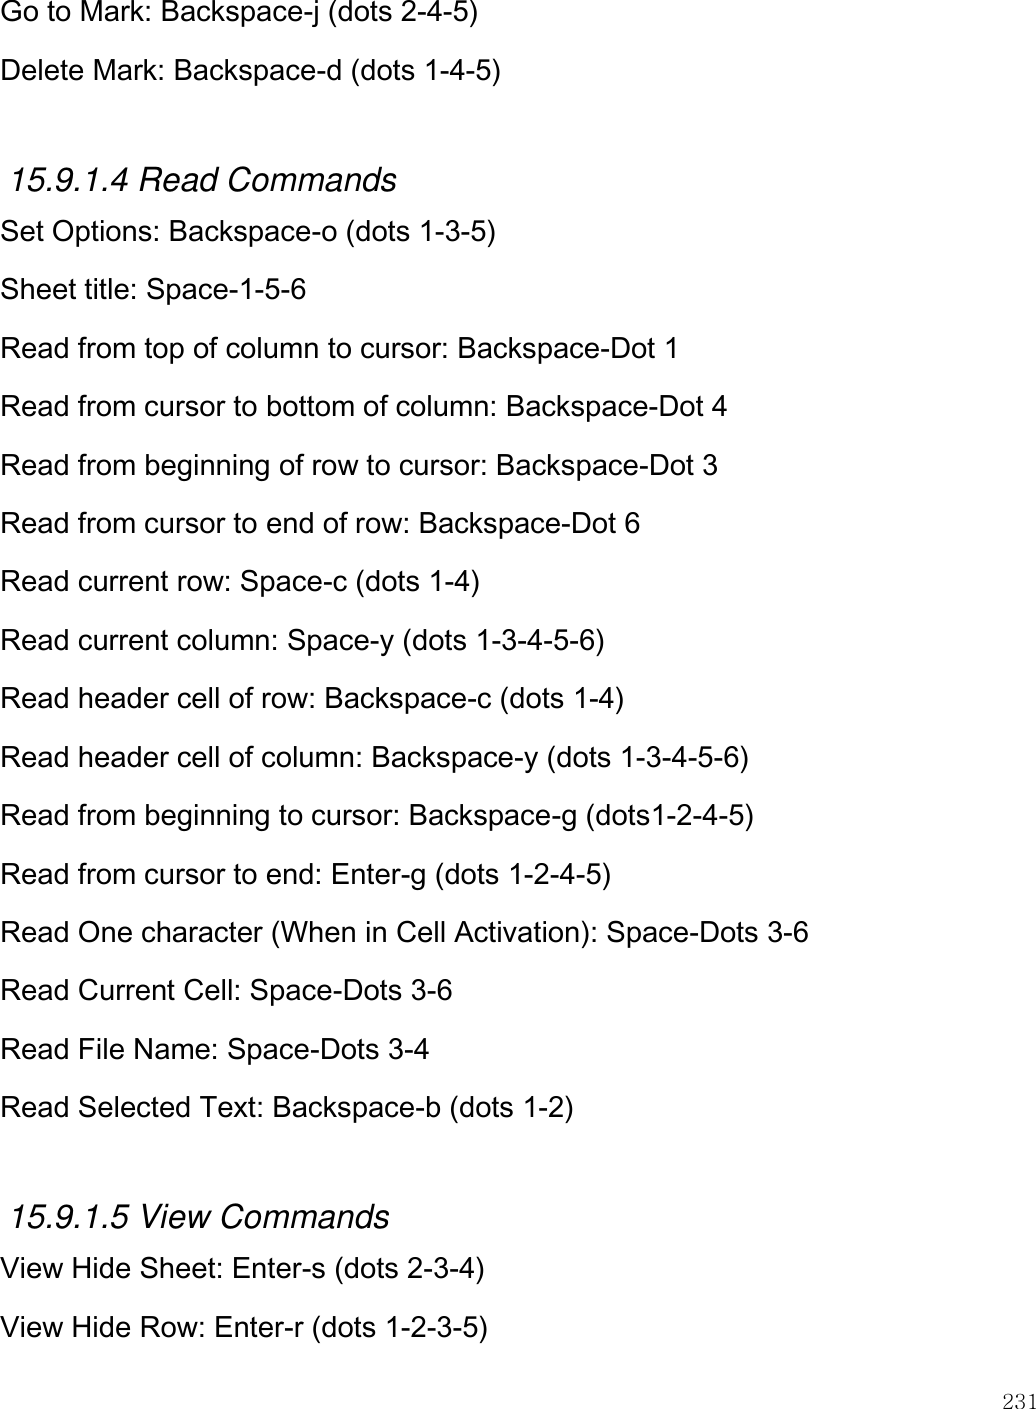    231  Go to Mark: Backspace-j (dots 2-4-5) Delete Mark: Backspace-d (dots 1-4-5)  15.9.1.4 Read Commands Set Options: Backspace-o (dots 1-3-5) Sheet title: Space-1-5-6 Read from top of column to cursor: Backspace-Dot 1 Read from cursor to bottom of column: Backspace-Dot 4 Read from beginning of row to cursor: Backspace-Dot 3 Read from cursor to end of row: Backspace-Dot 6 Read current row: Space-c (dots 1-4) Read current column: Space-y (dots 1-3-4-5-6) Read header cell of row: Backspace-c (dots 1-4) Read header cell of column: Backspace-y (dots 1-3-4-5-6) Read from beginning to cursor: Backspace-g (dots1-2-4-5) Read from cursor to end: Enter-g (dots 1-2-4-5) Read One character (When in Cell Activation): Space-Dots 3-6 Read Current Cell: Space-Dots 3-6 Read File Name: Space-Dots 3-4 Read Selected Text: Backspace-b (dots 1-2)  15.9.1.5 View Commands View Hide Sheet: Enter-s (dots 2-3-4) View Hide Row: Enter-r (dots 1-2-3-5) 